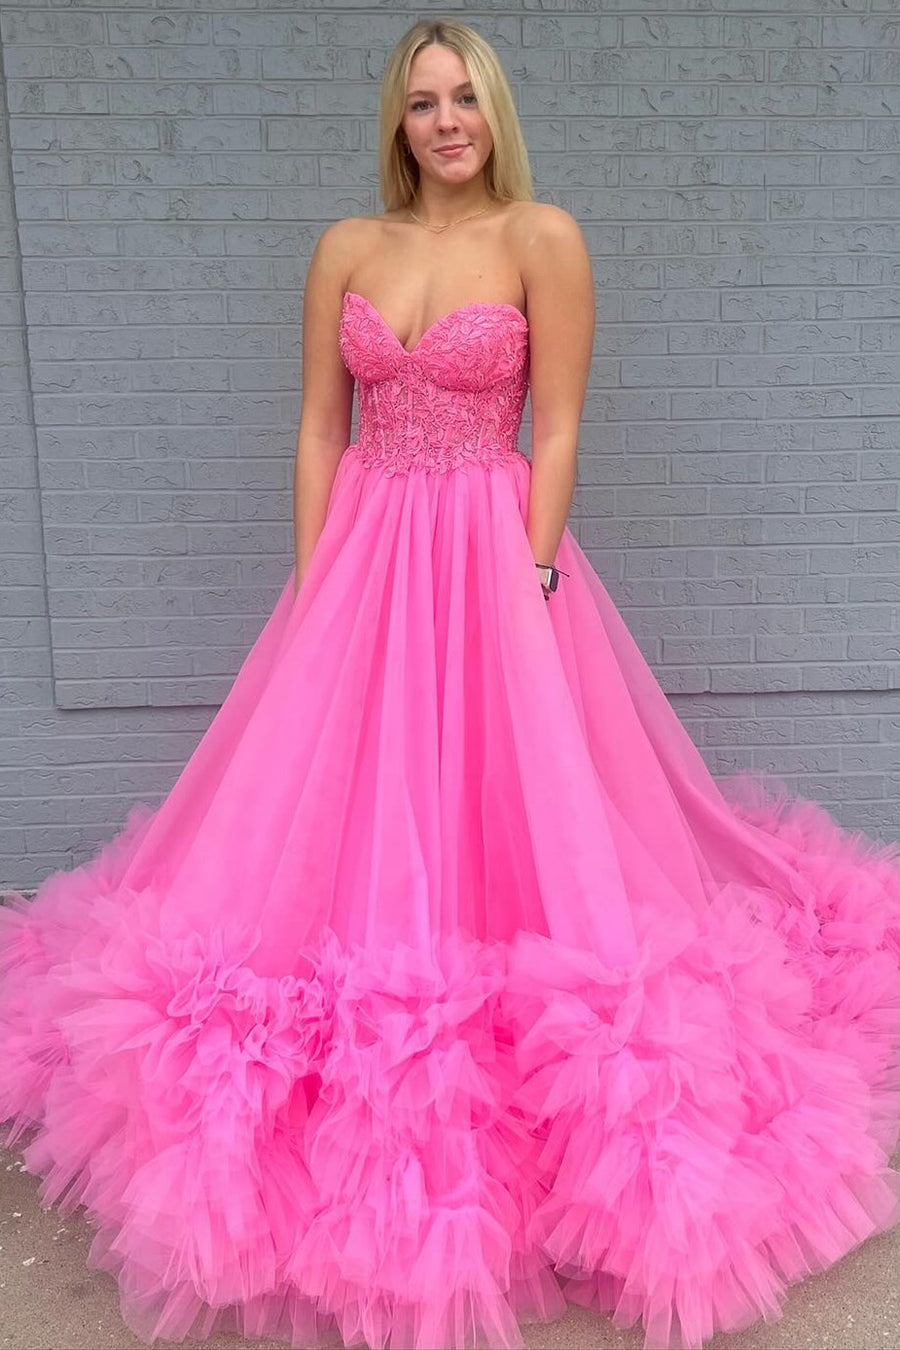 Red Tulle Appliques Sweetheart Ruffle Long Prom Dress